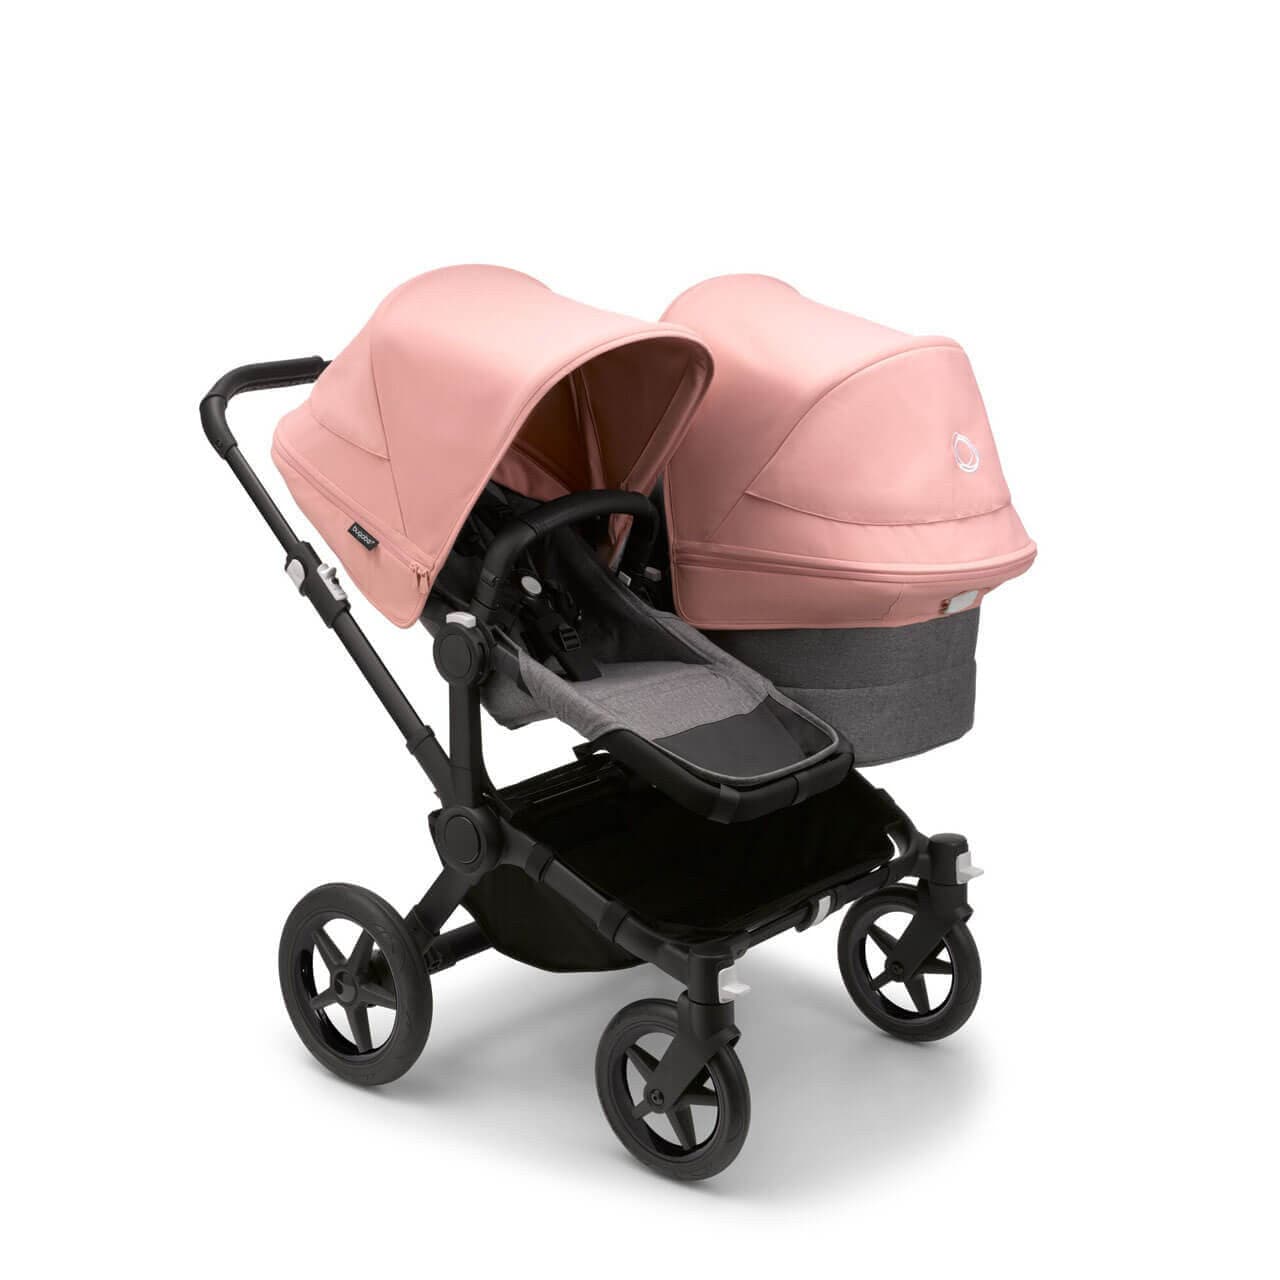 Bugaboo Donkey 5 Duo Travel System on Black/Grey Chassis - Choose Your Colour - Morning Pink | For Your Little One